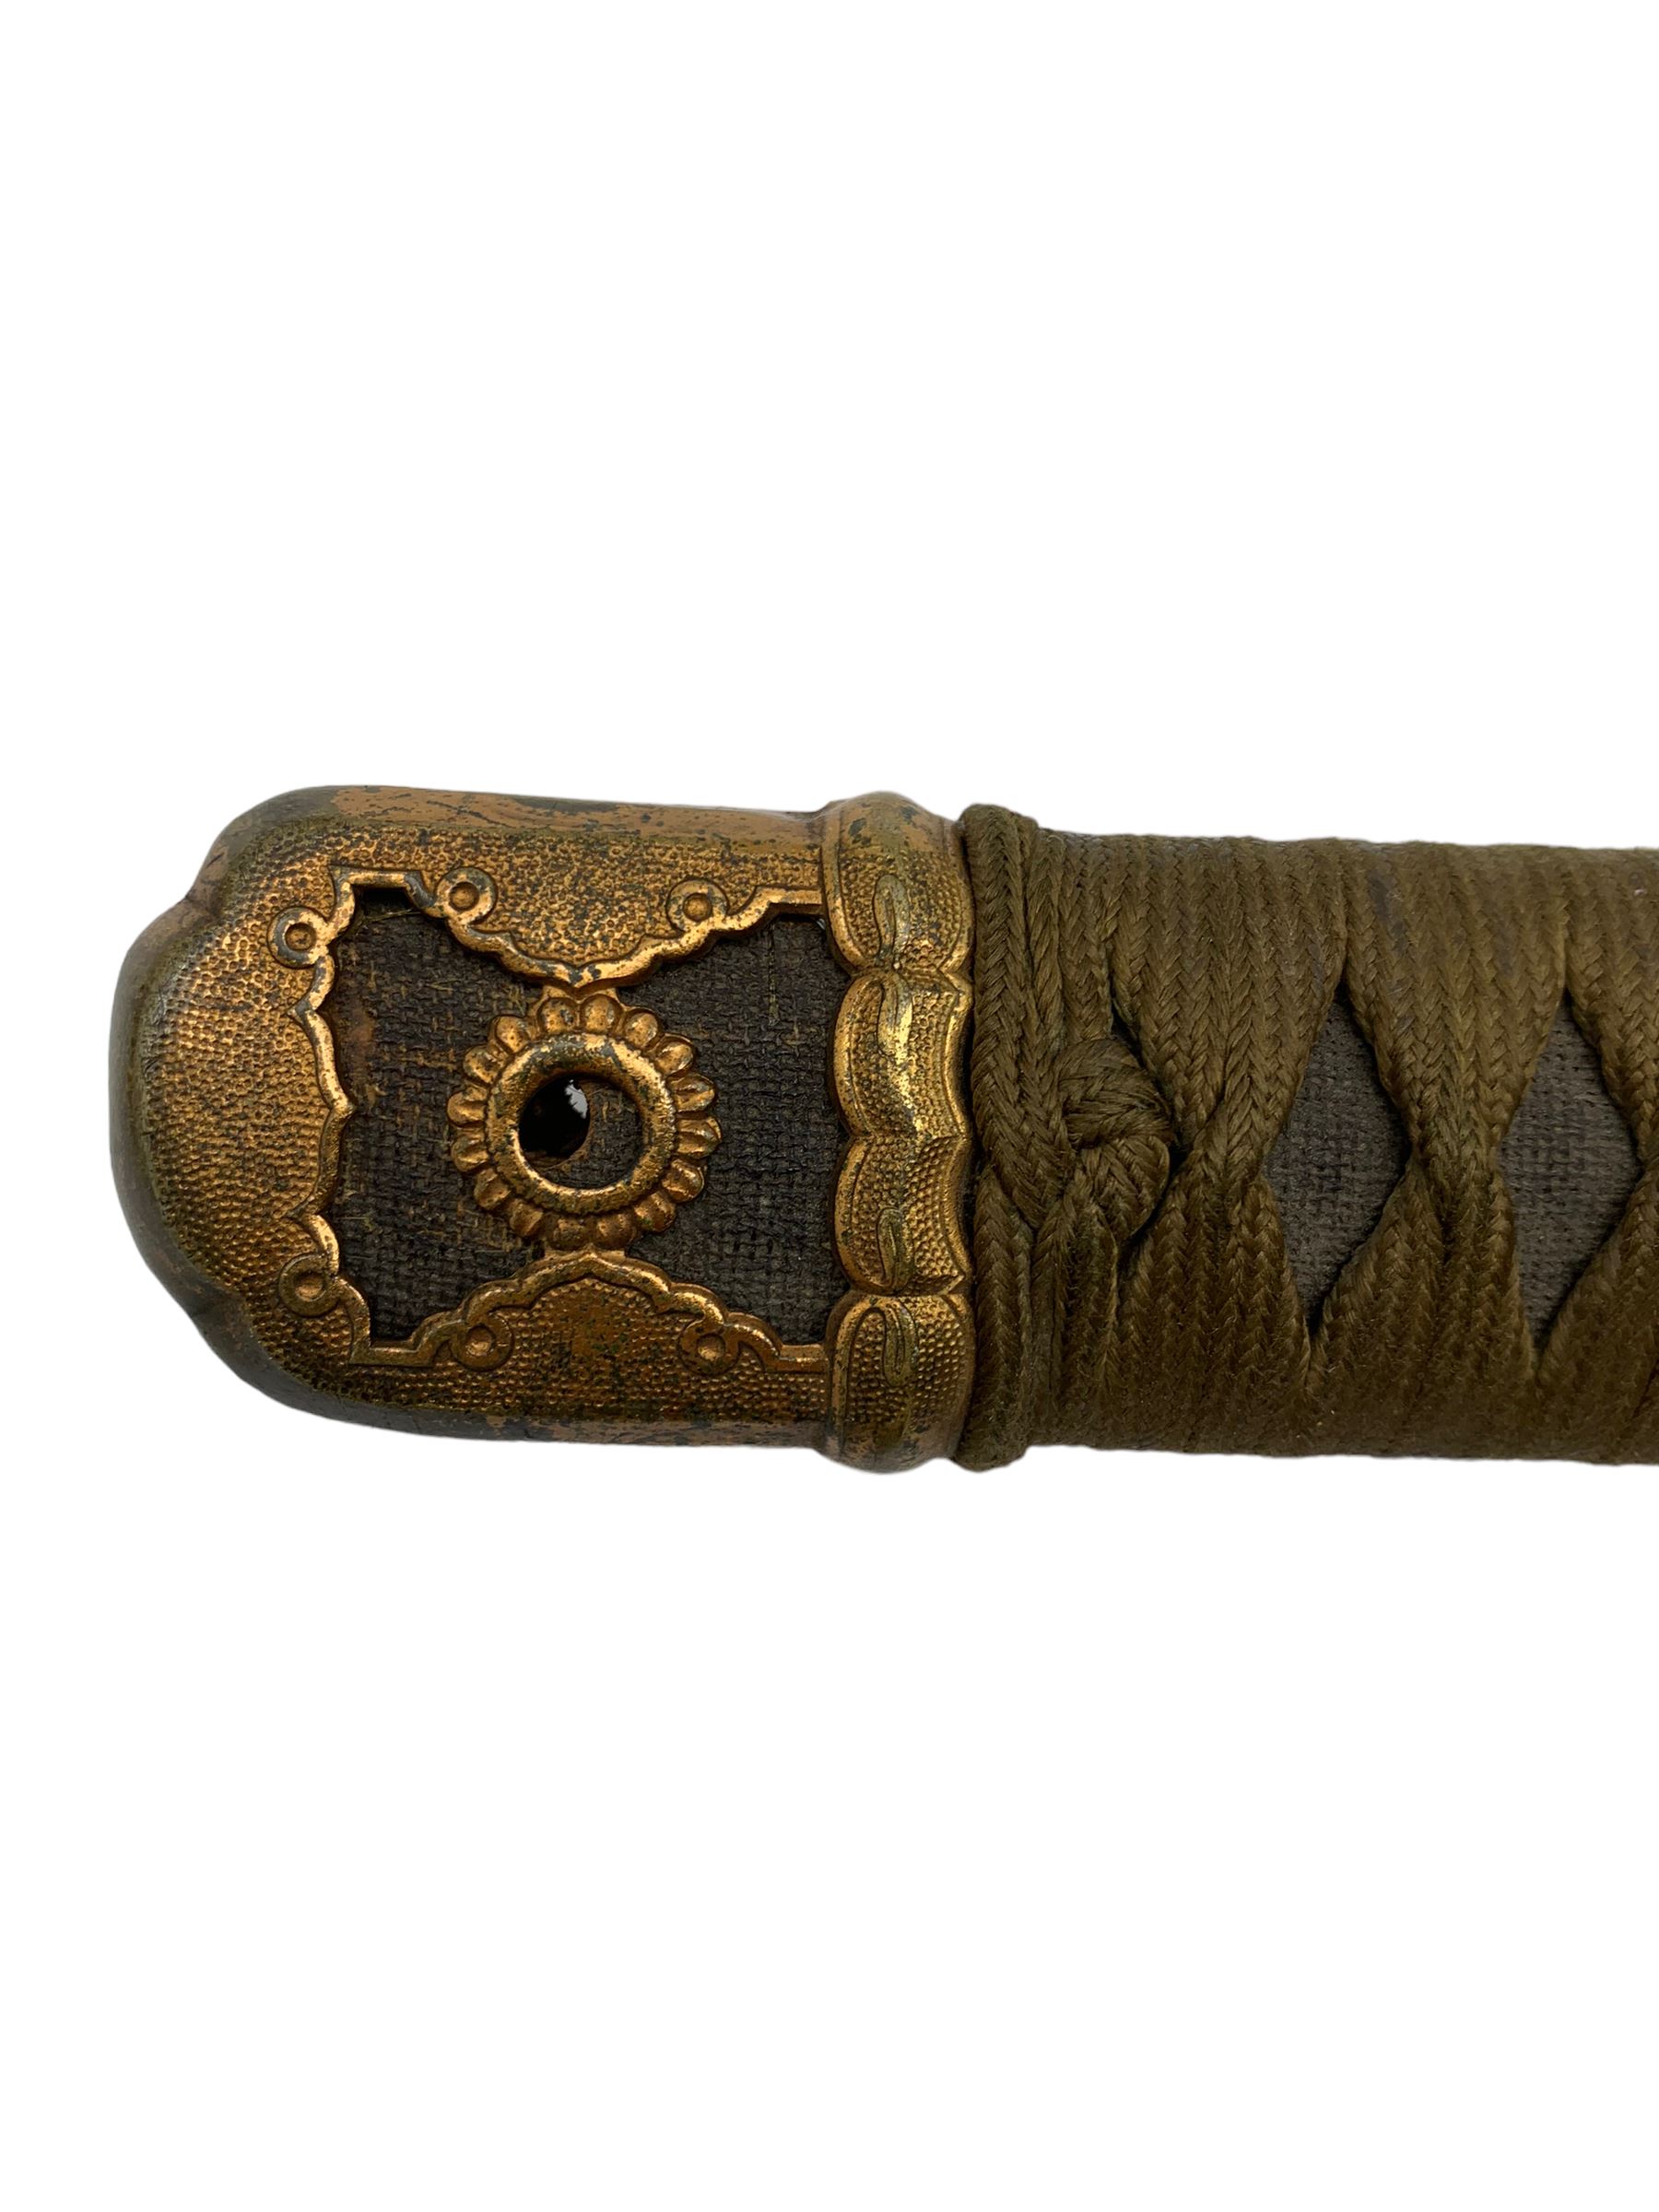 World War II Japanese Katana with cord wound tsuka and military mounts in lacquered scabbard - Image 4 of 10